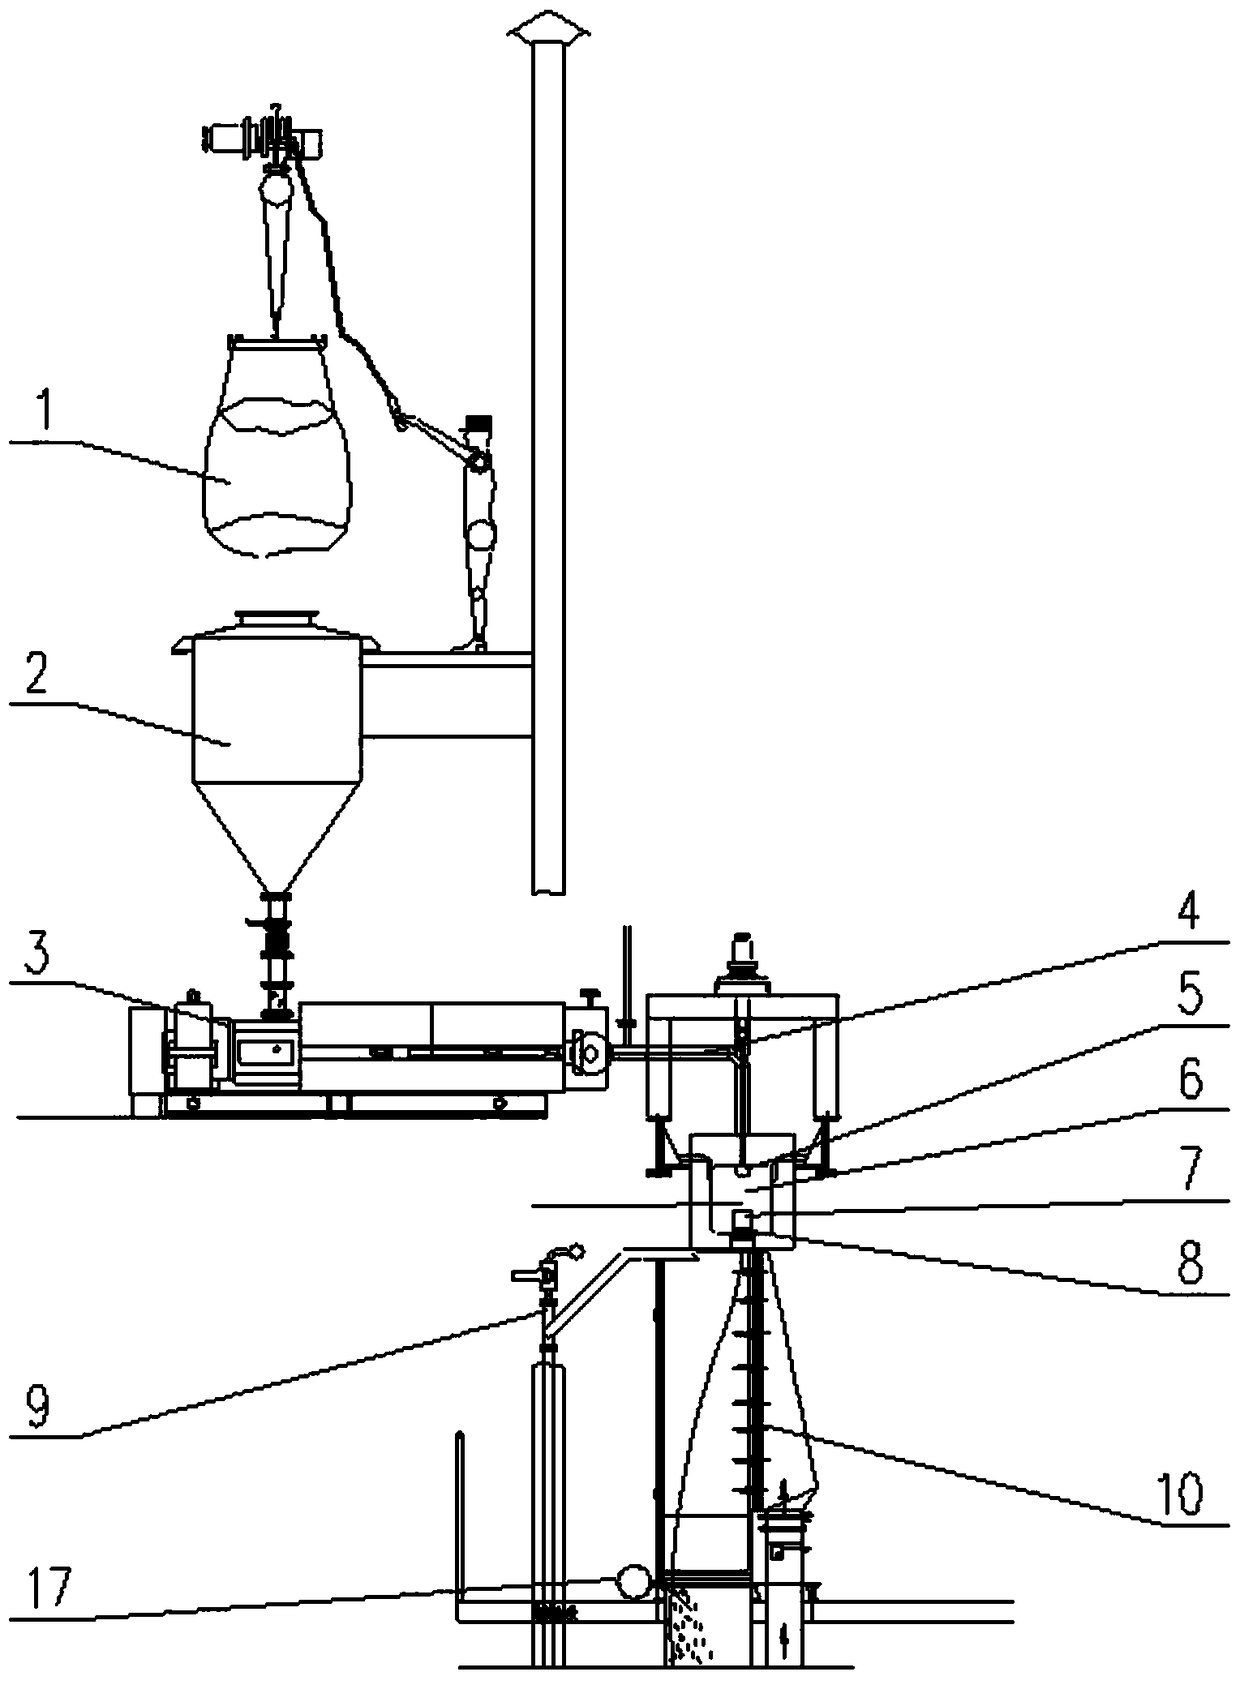 A spray humidifier and chemical fiber spinning machine